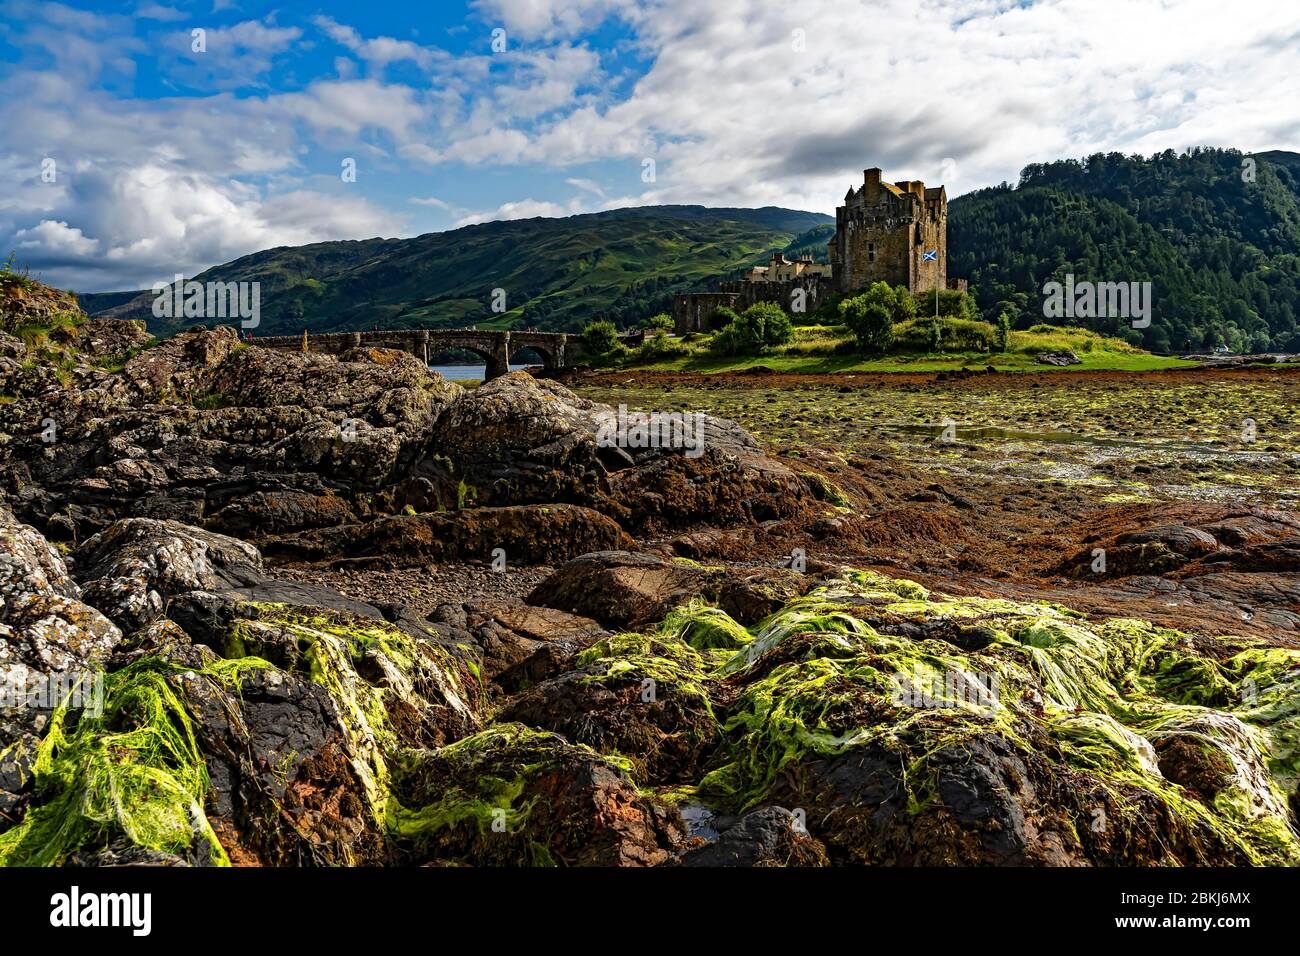 United Kingdom, Scotland, Highlands, Ross & Cromarty County, Dornie, Eilean Donan Castle at the entrance to Loch Duich Stock Photo